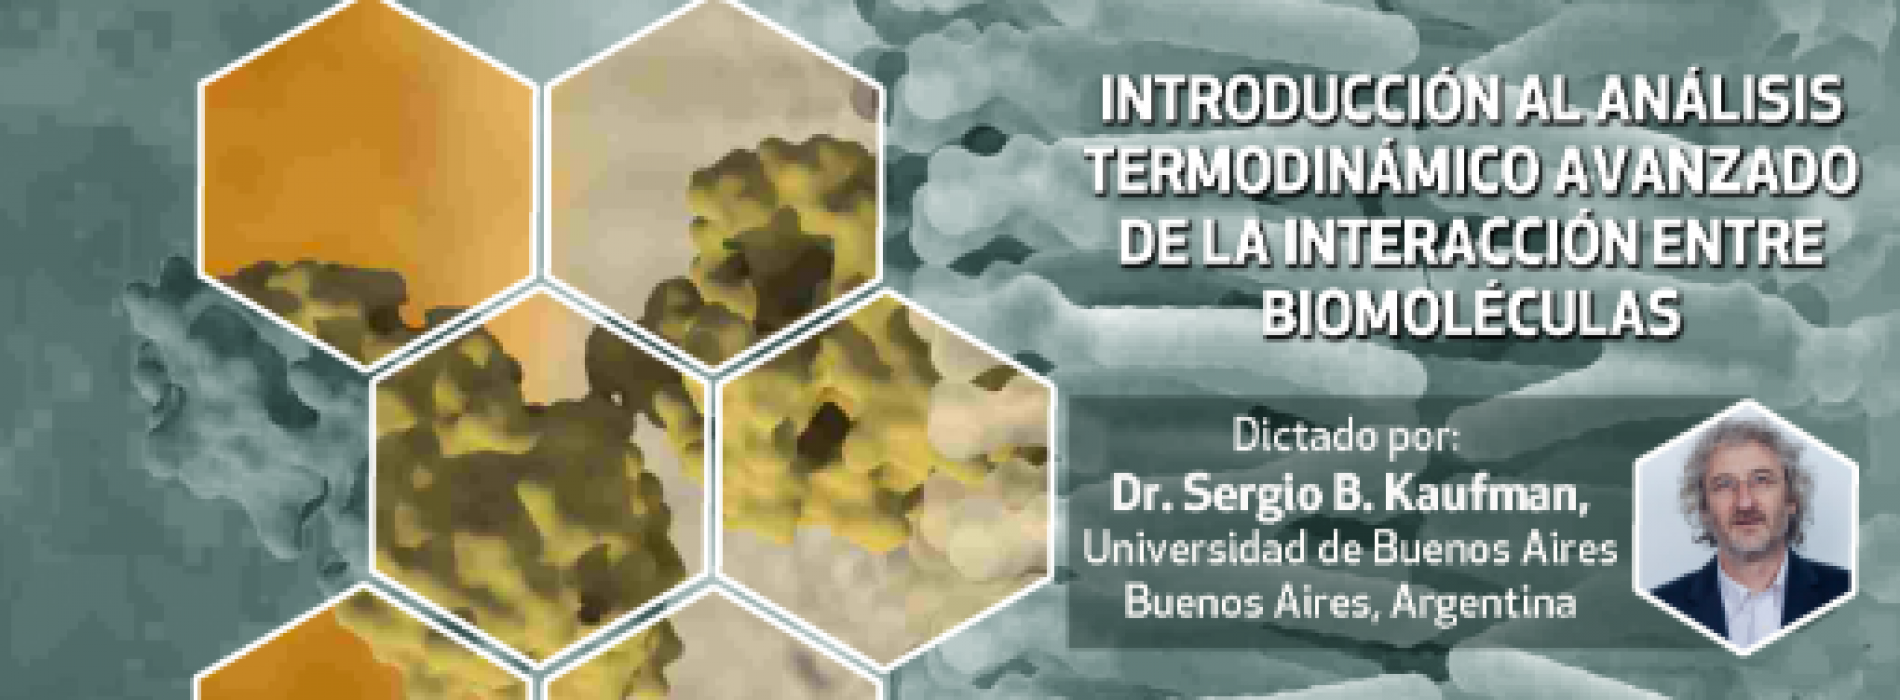 COURSE INTRODUCTION TO THERMODYNAMIC ANALYSIS ADVANCED INTERACTION BETWEEN BIOMOLECULES